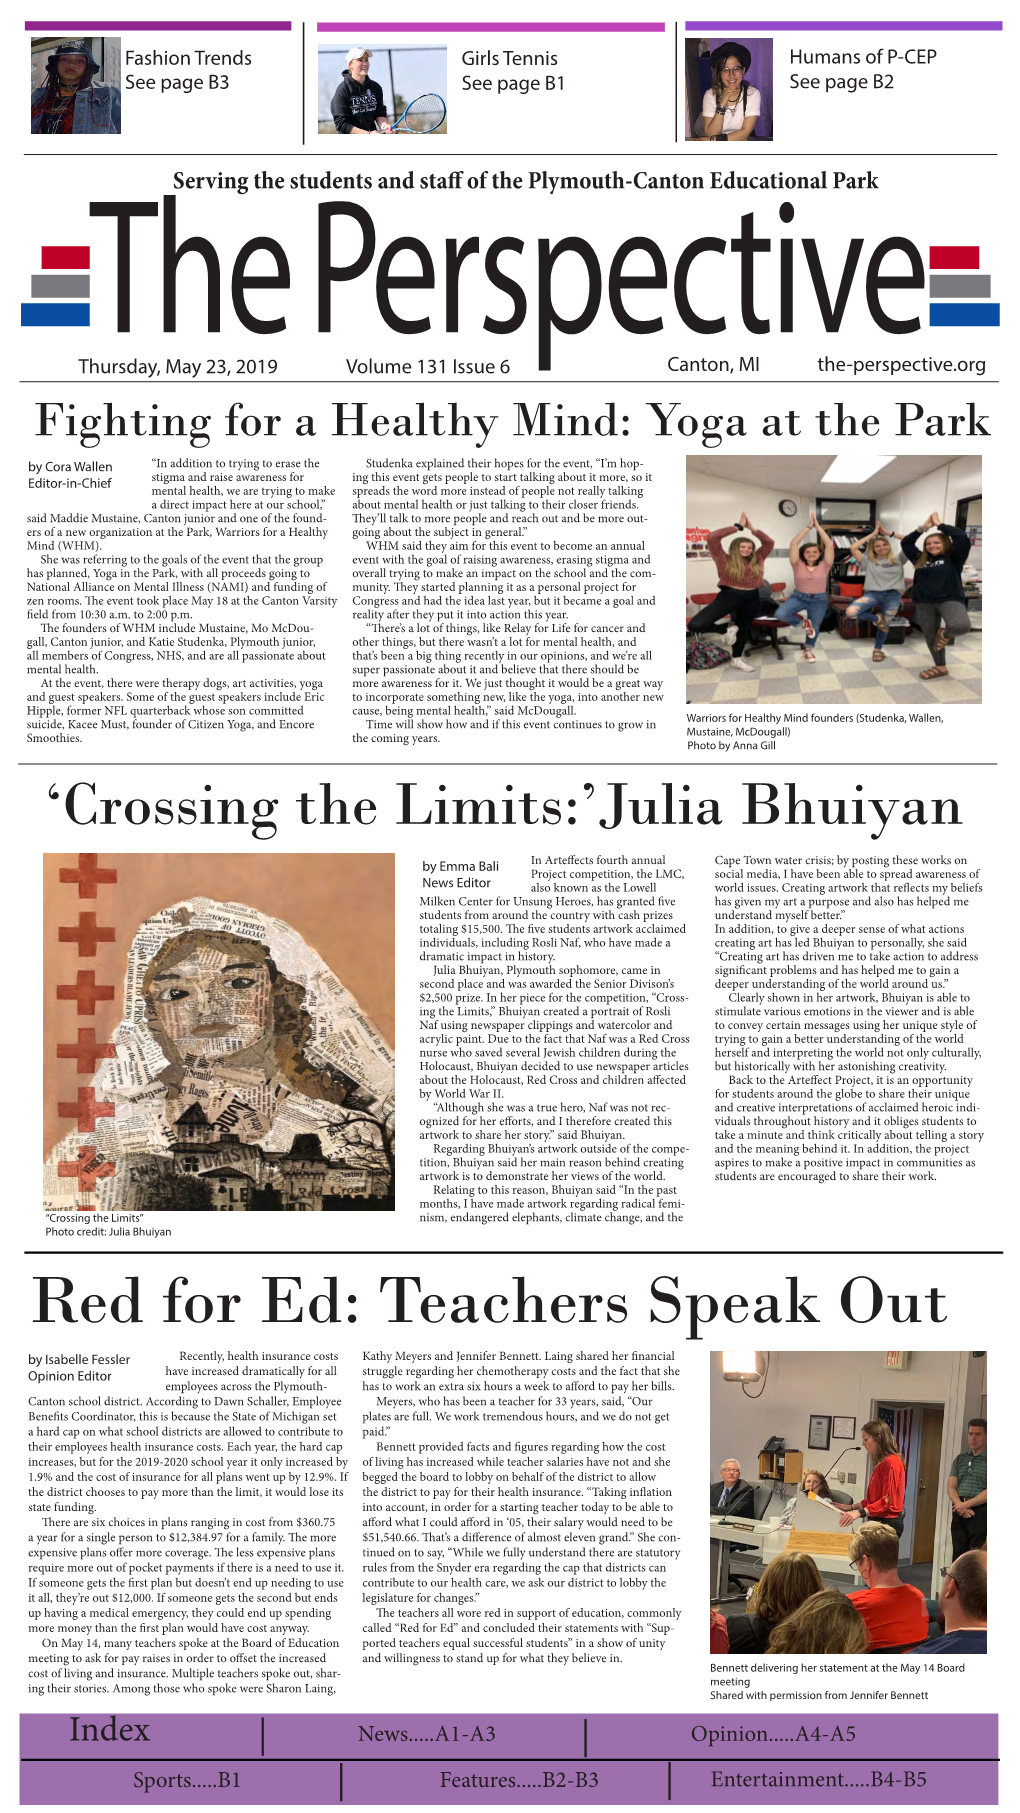 Red for Ed: Teachers Speak out by Isabelle Fessler Recently, Health Insurance Costs Kathy Meyers and Jennifer Bennett